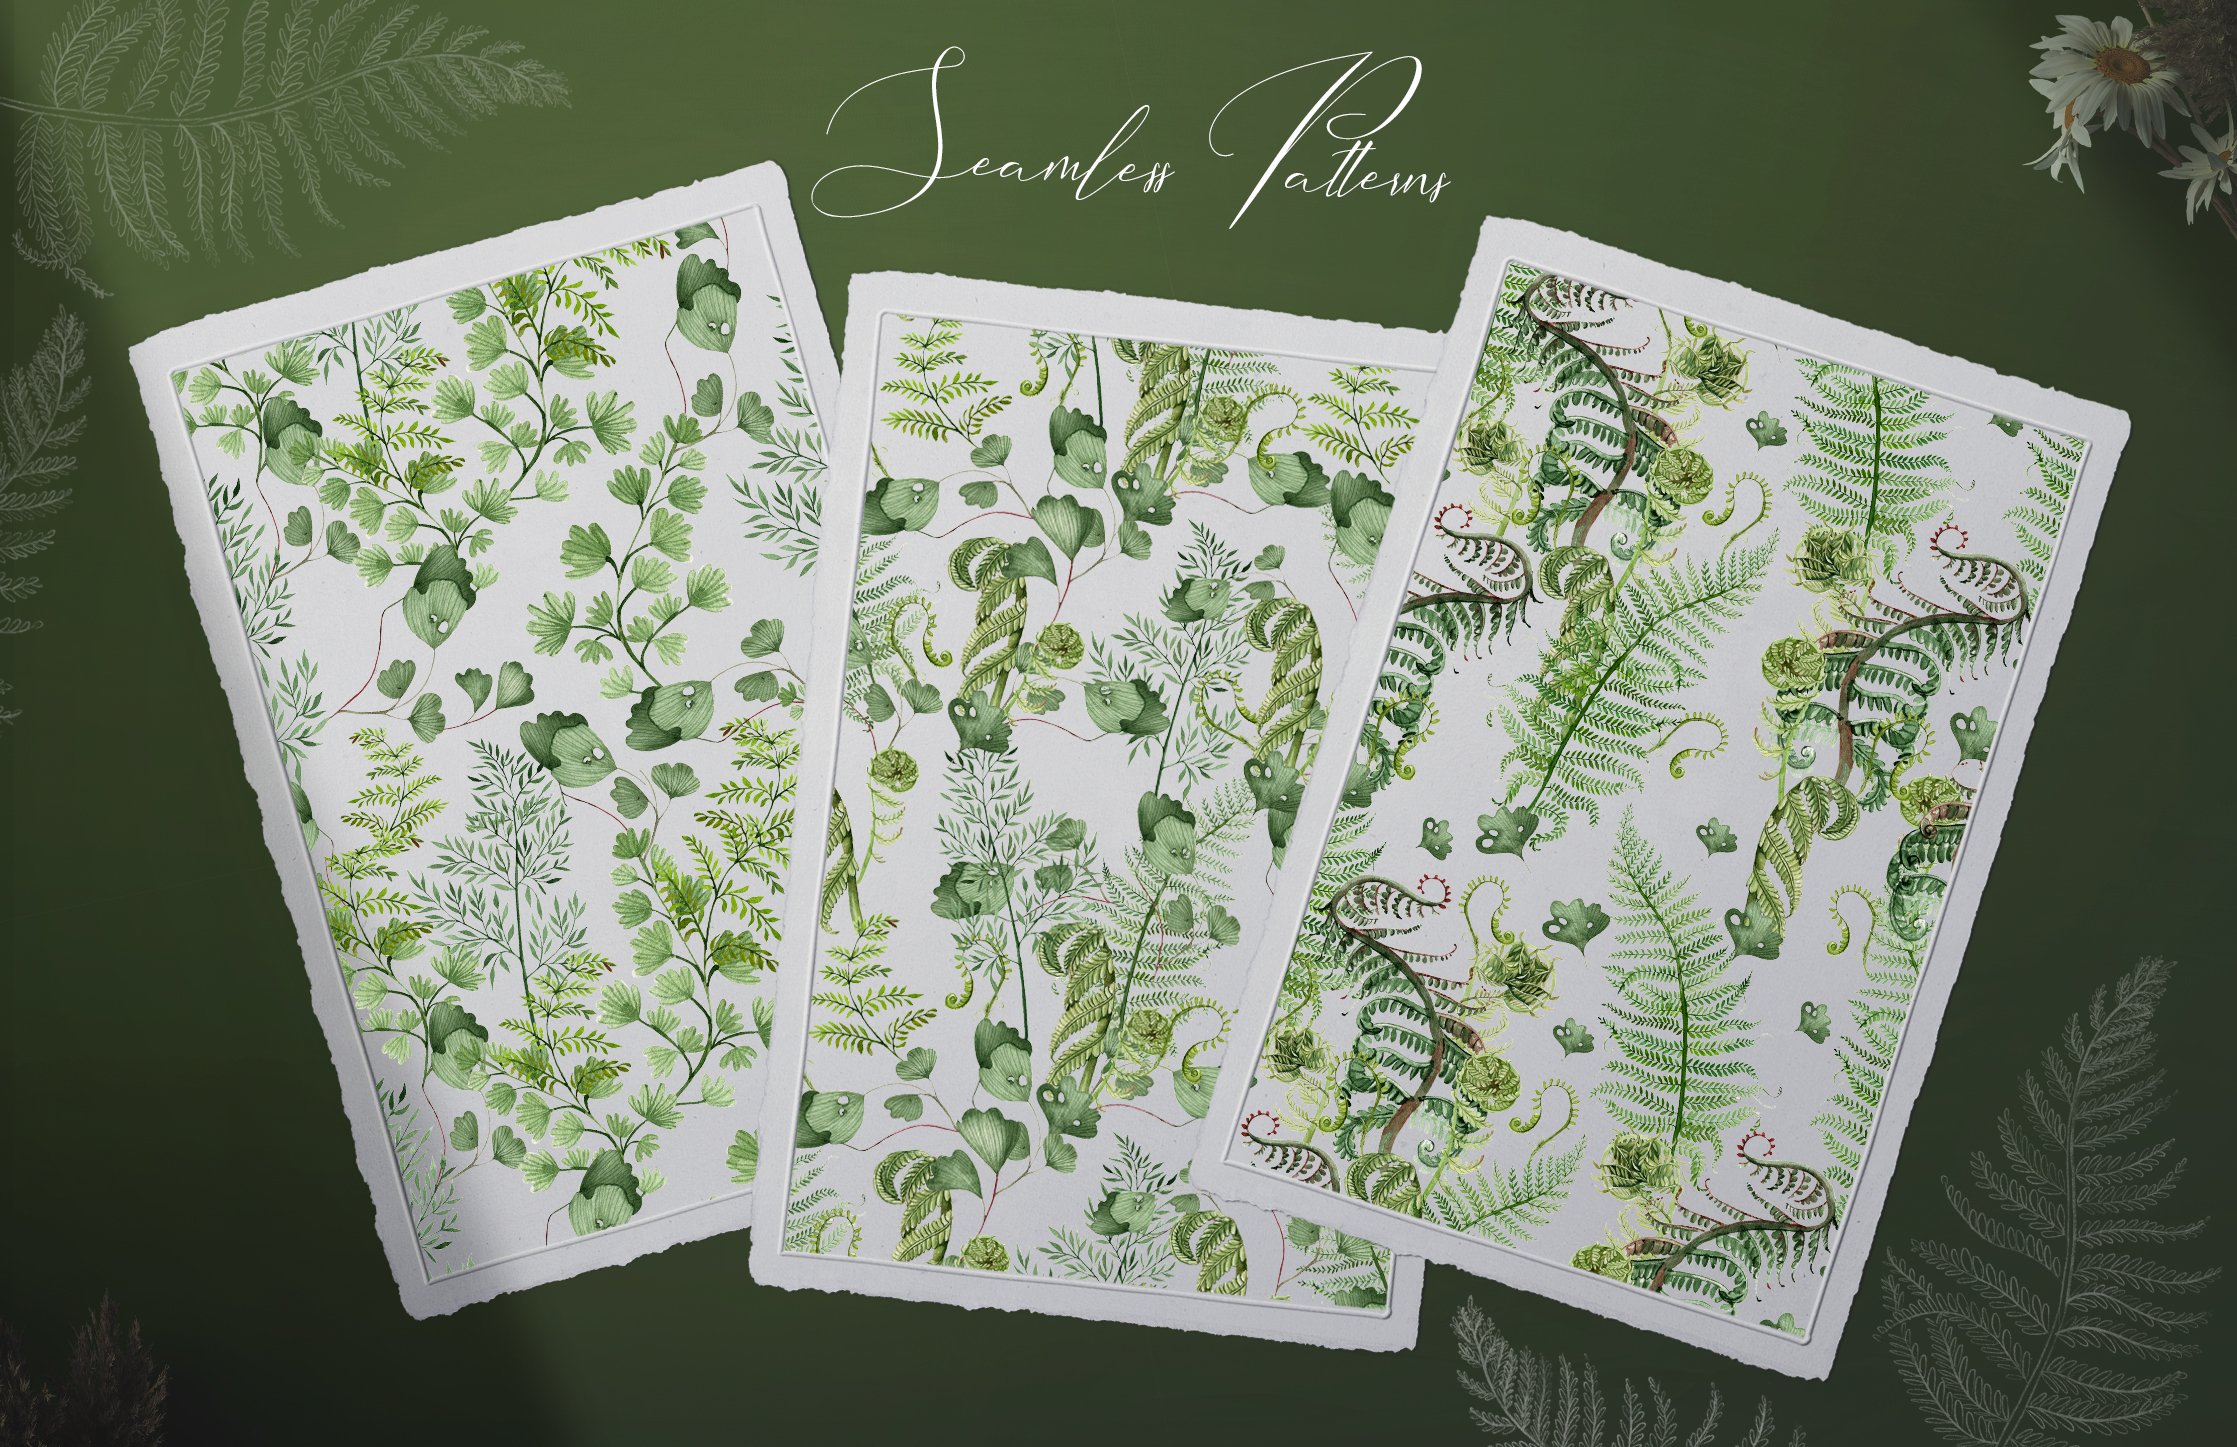 Four watercolor paintings of green plants and leaves.